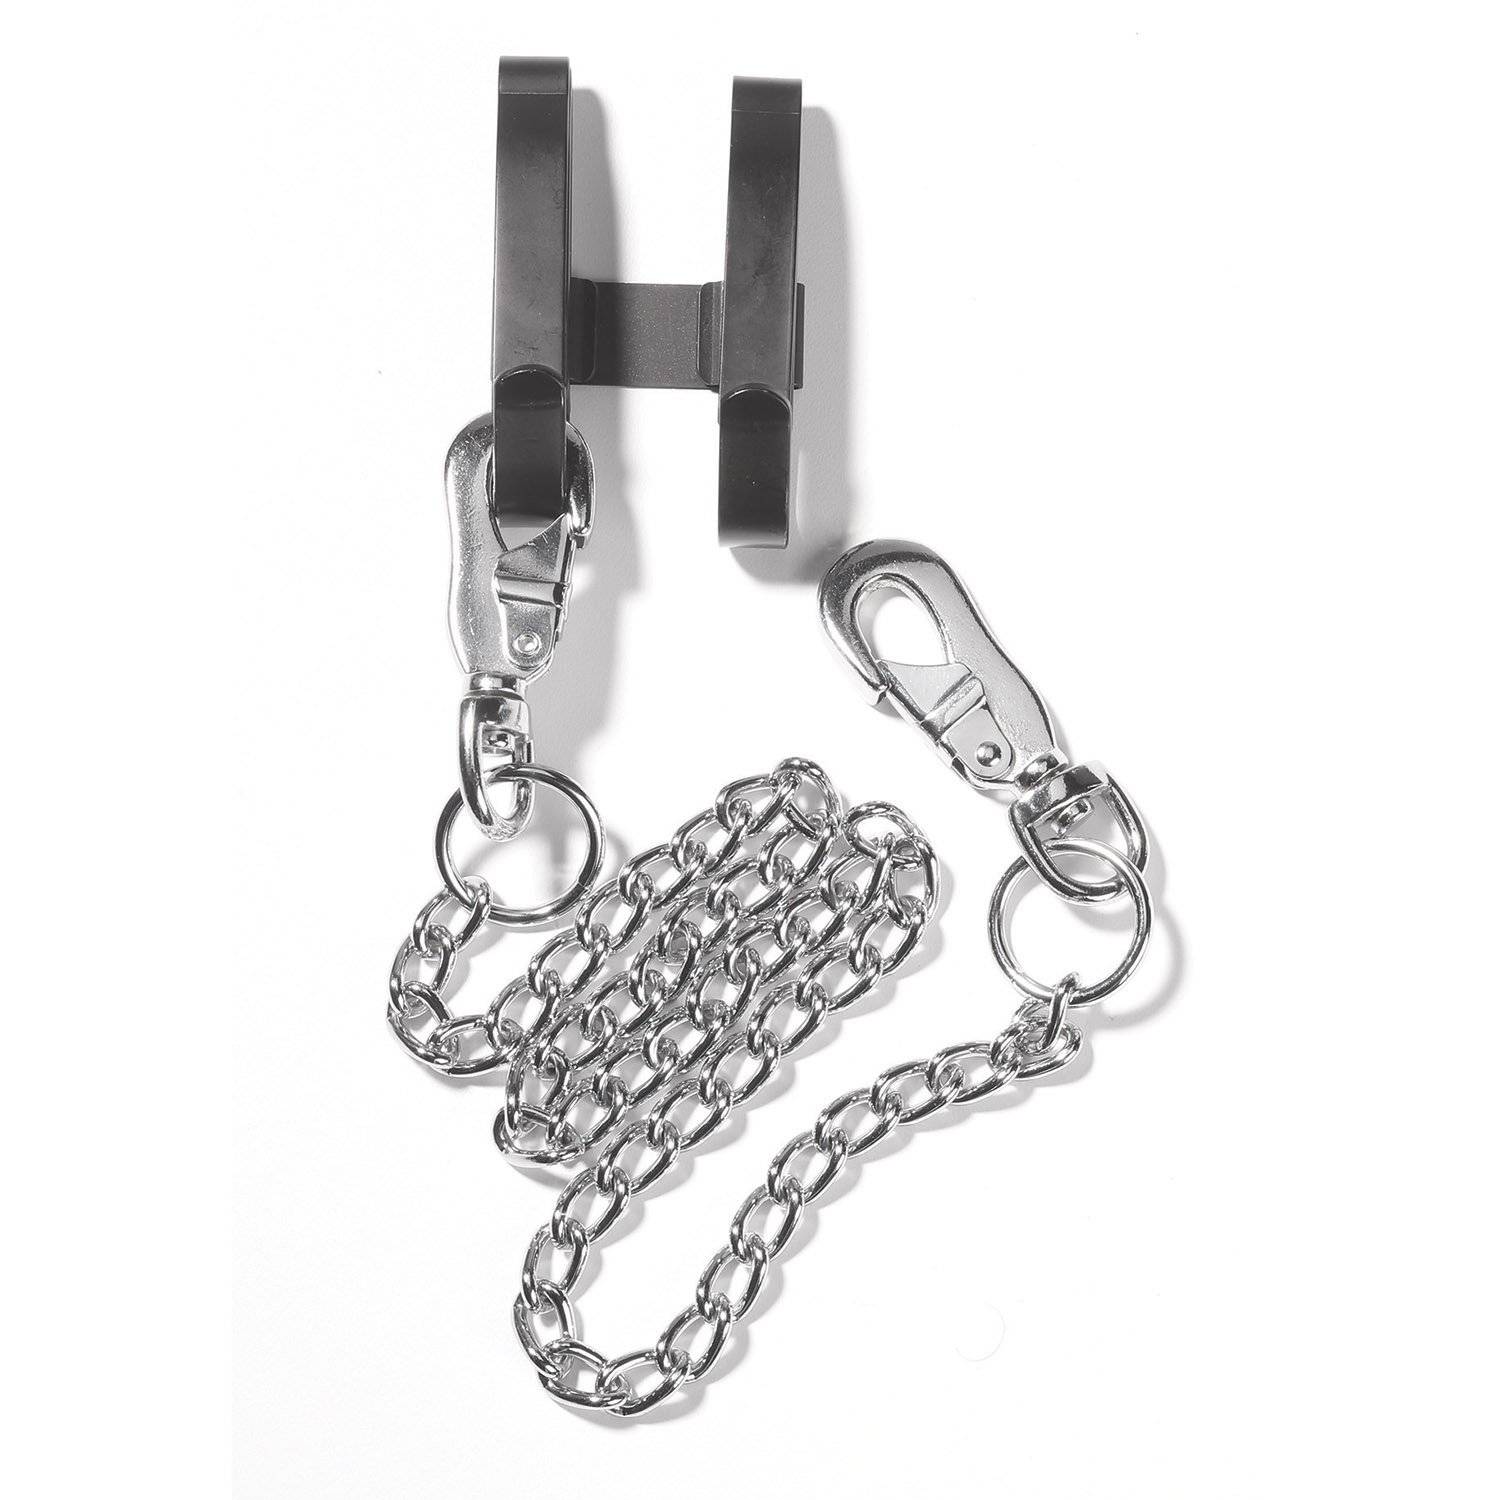 Security Guard or Corrections Key Chain for Police and Law Enforcement 